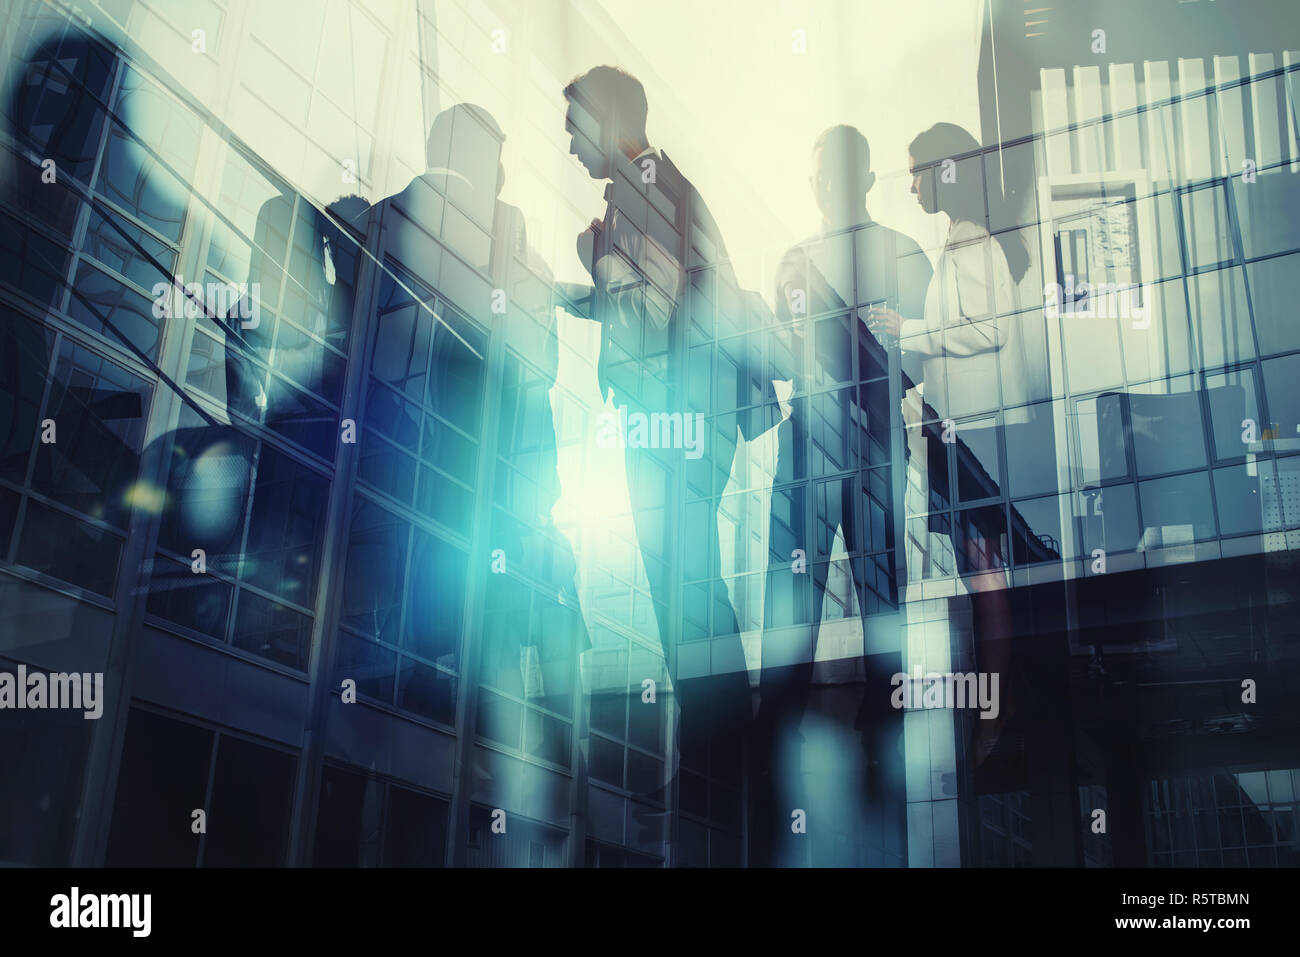 Silhouette of business people working together in office. Concept of teamwork and partnership. double exposure with light effects Stock Photo